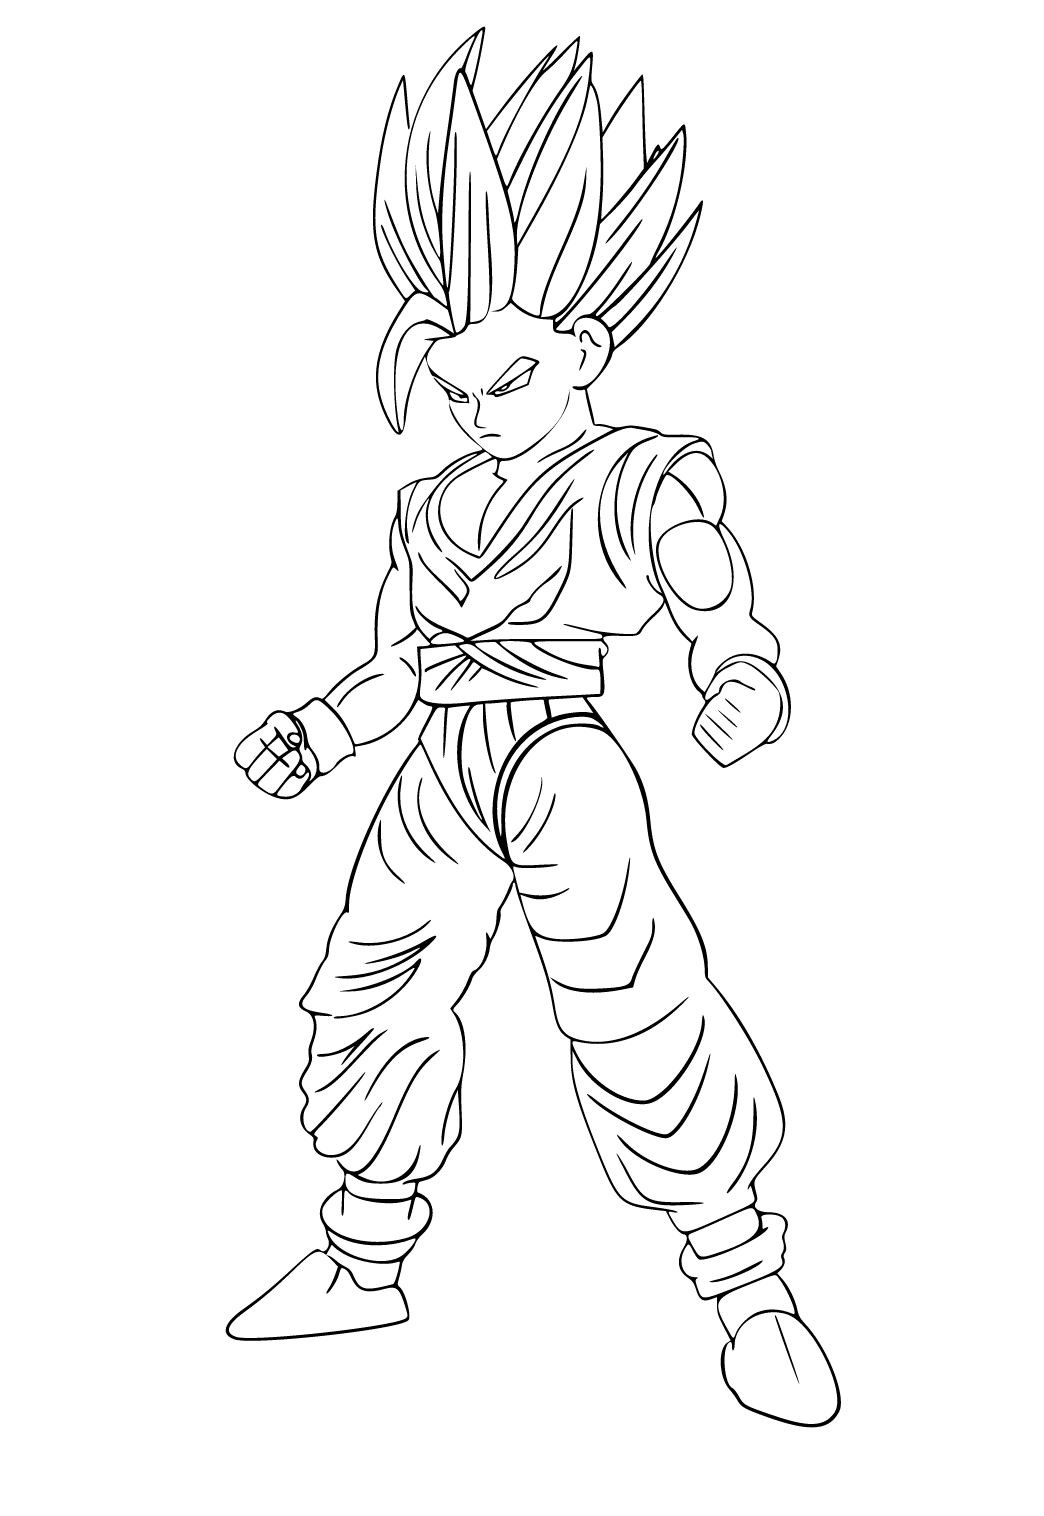 Free Printable Dragon Ball Z Goku Coloring Page, Sheet And Picture For  Adults And Kids (Girls And Boys)  - Coloring Home